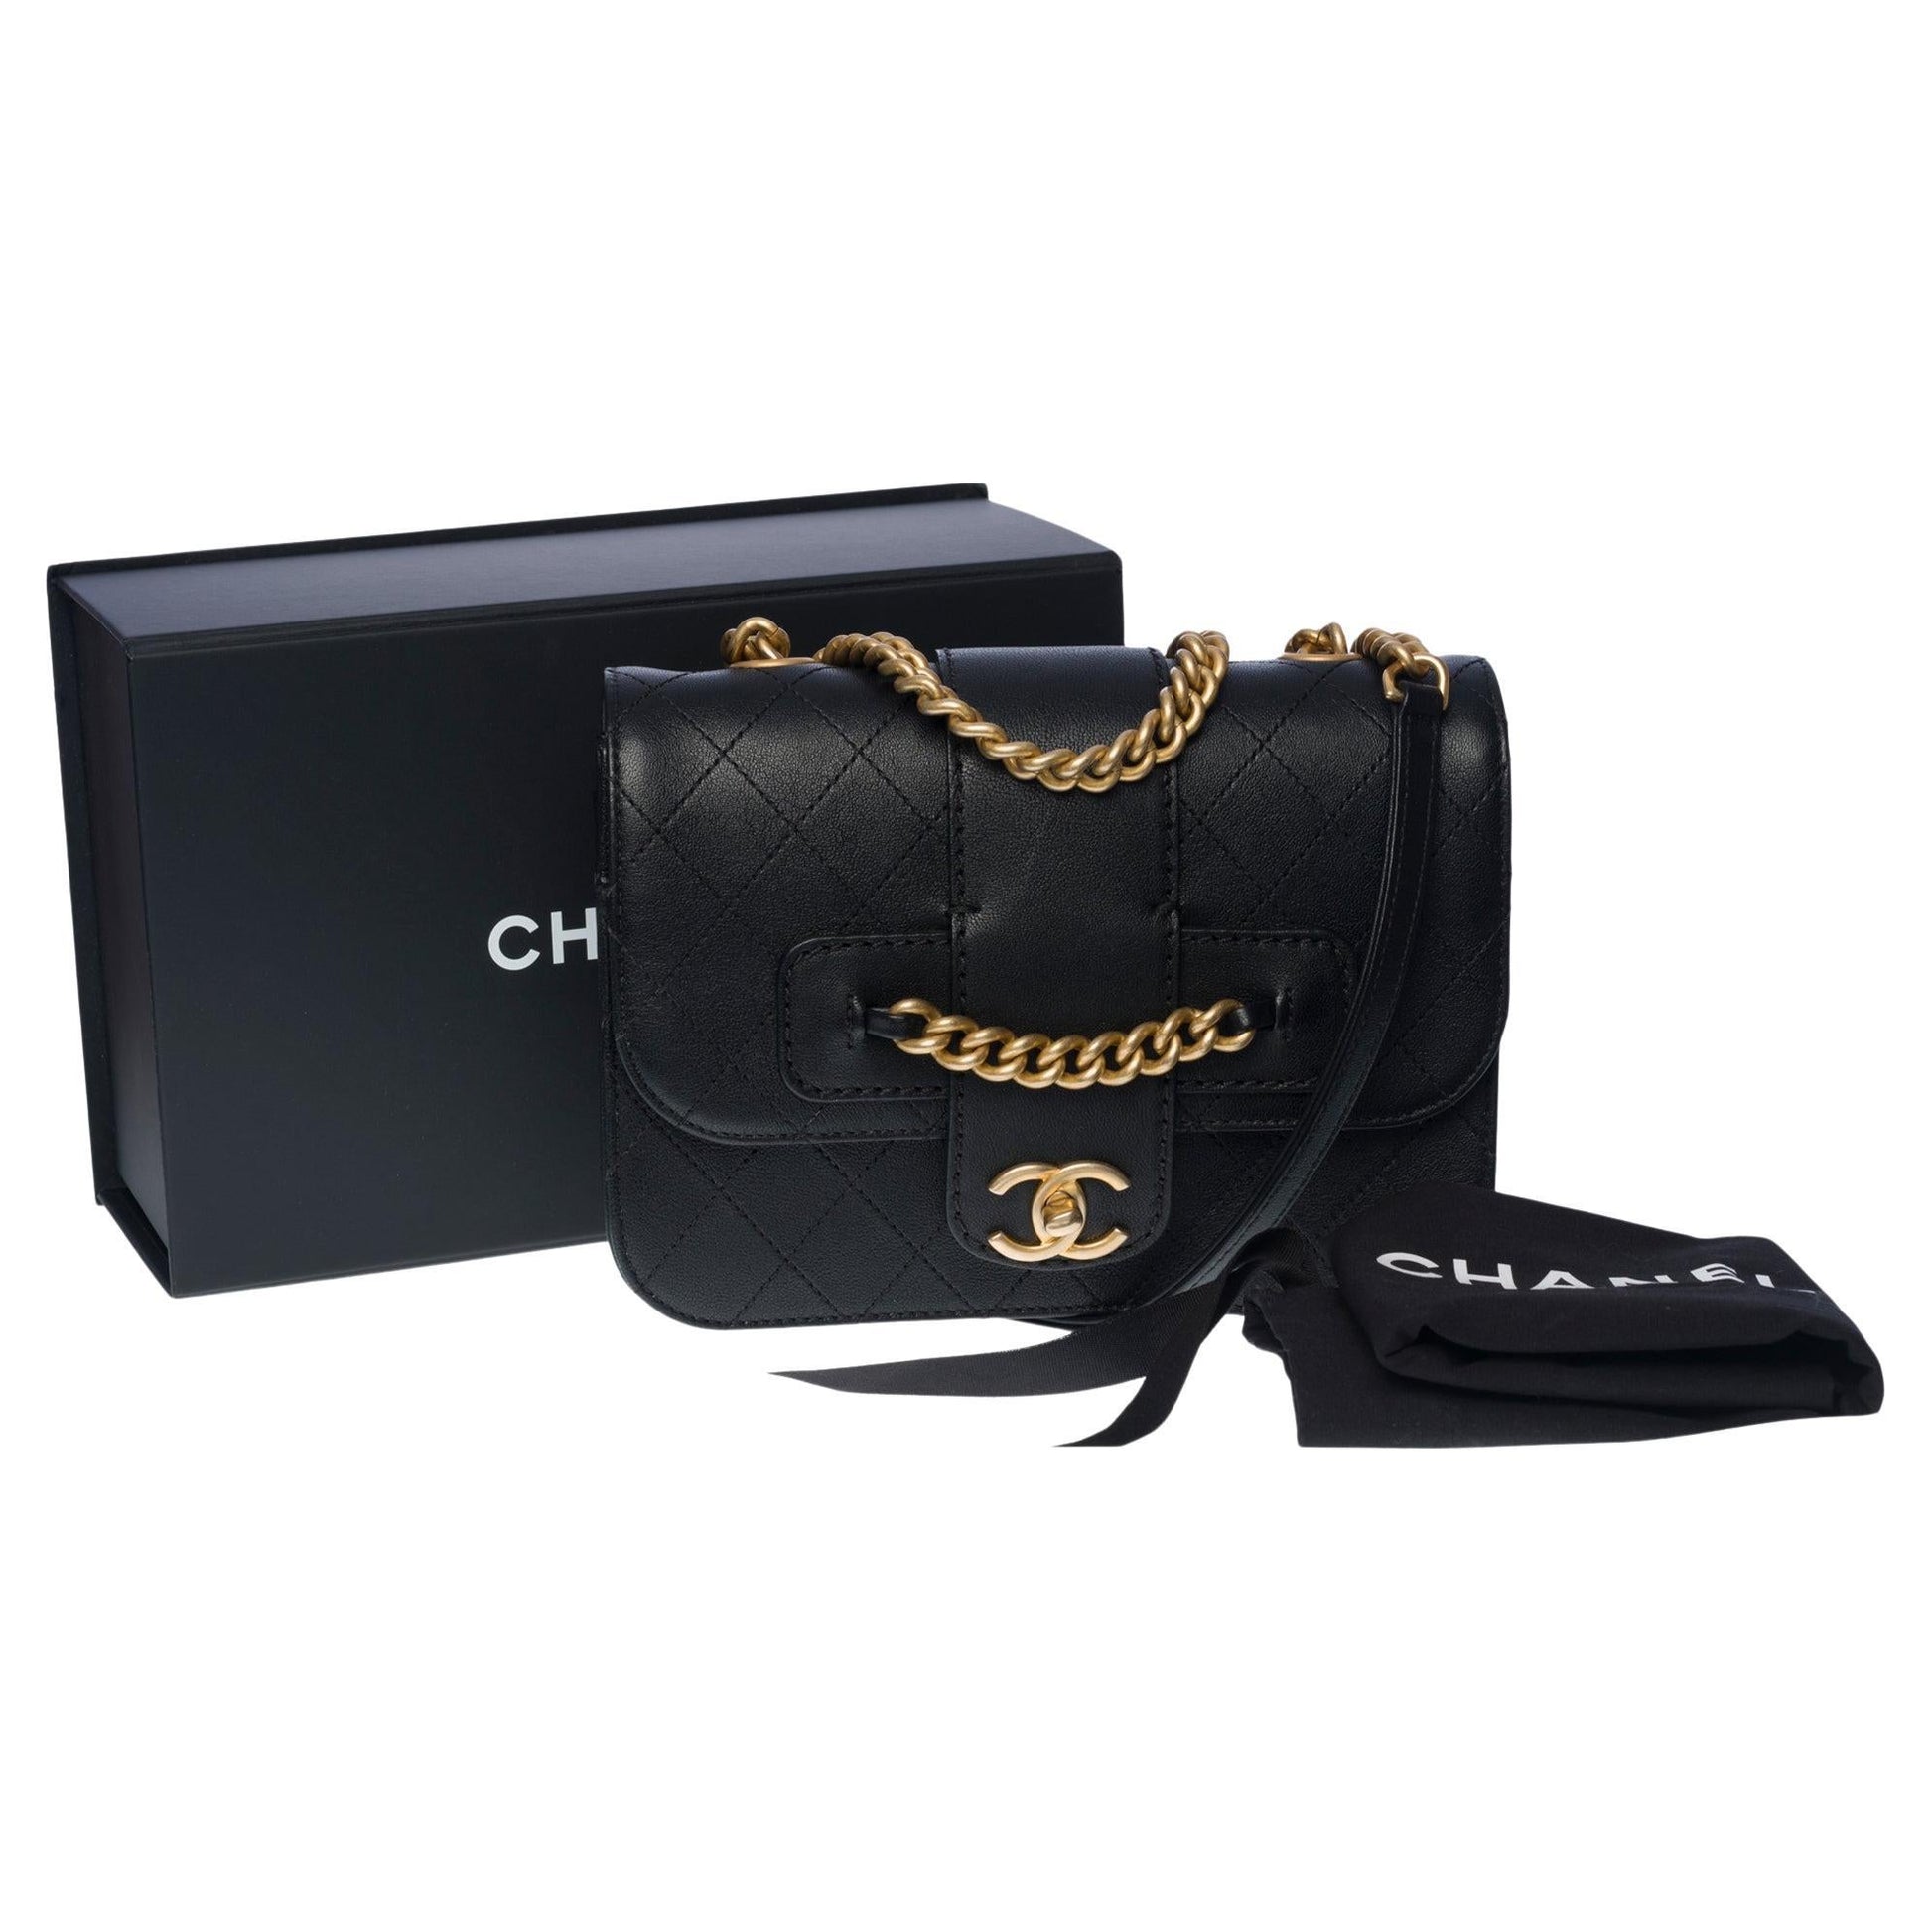 LIMITED EDITION- CHANEL CLASSIC FLAP BAG CROSSBODY BAG IN BLACK  LEATHER-100486